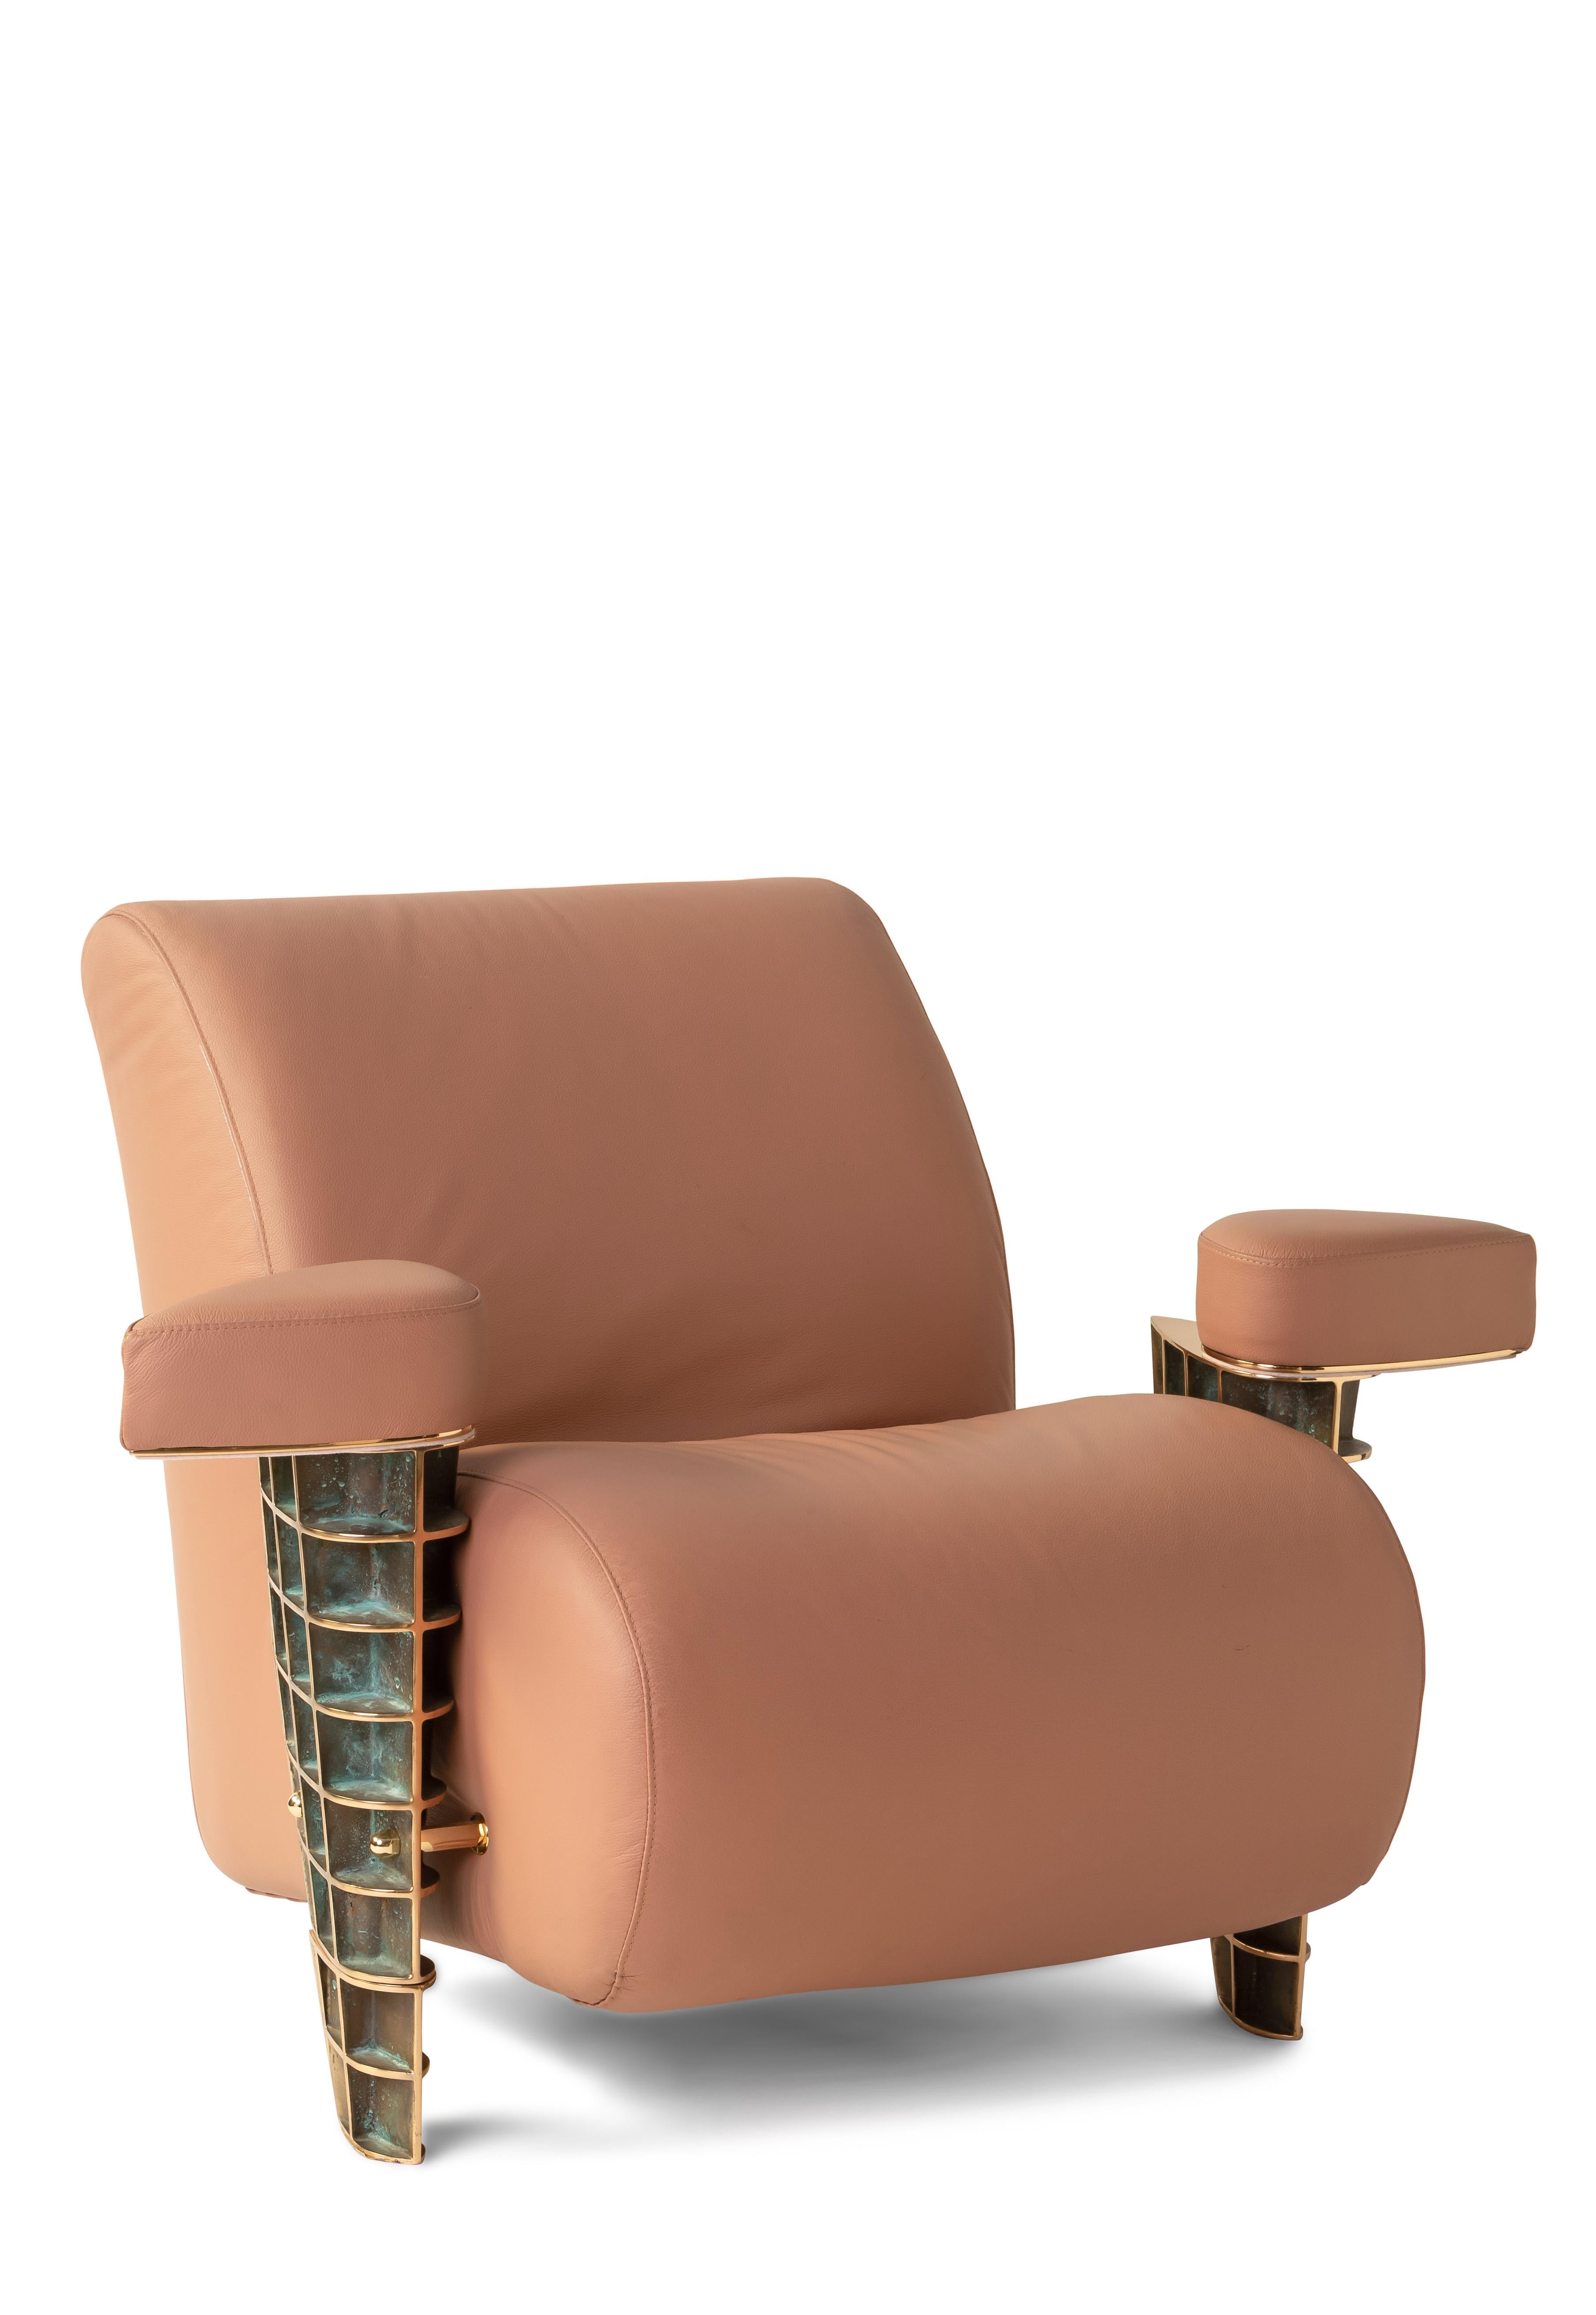 Elvira is a sculpture armchair and a bespoke masterpiece created by Angela Ardisson for her Avio Collection in 1997. The design of the precious bronze castings draws its unique inspiration from the fuselage of airplanes. 
The bearing structure